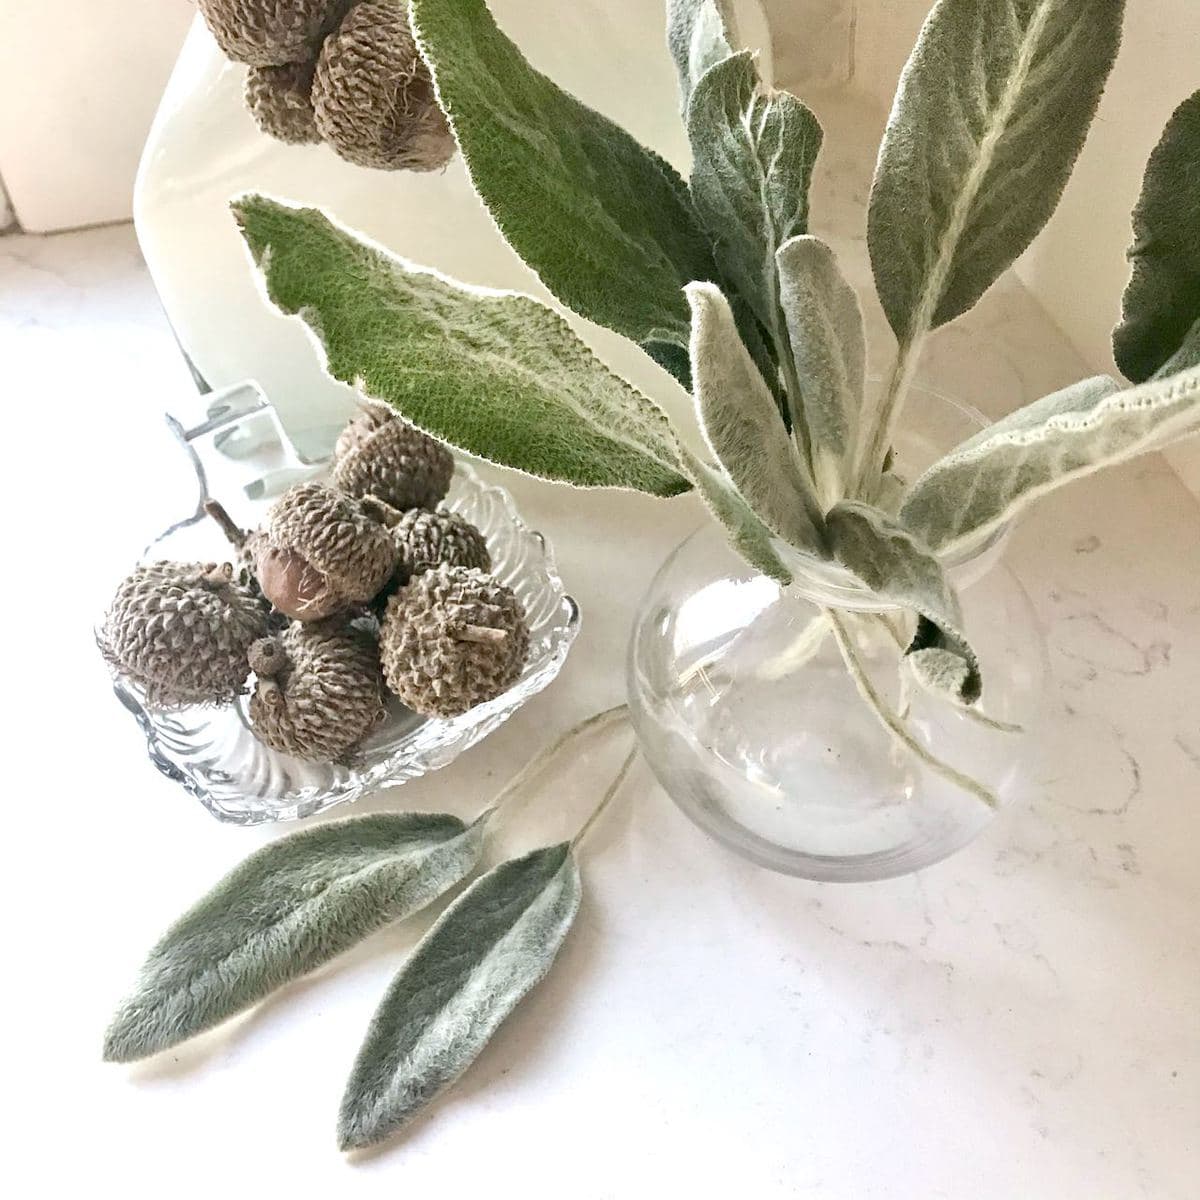 Lambs Ear in a glass bulb vase on a counter with two leaves on the counter and acorns beside